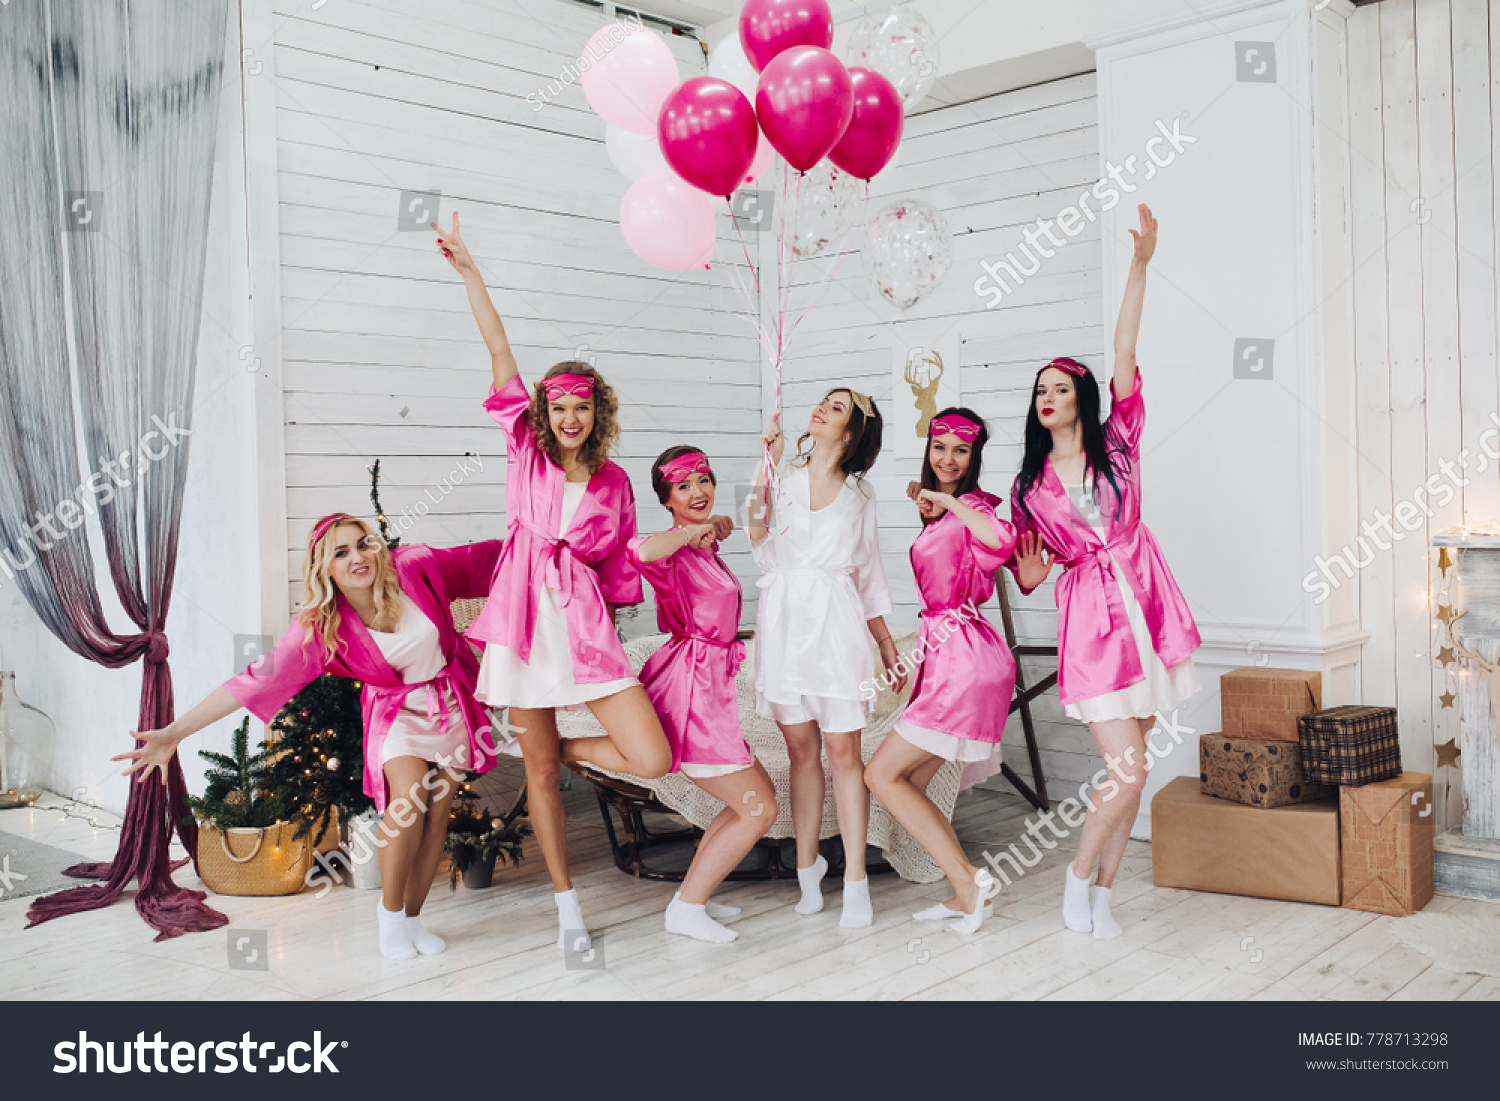 Full length portrait of happy lovely girlfriends in pink robes and sleeping masks jumping and having fun at hen party. Bride-to-be in white robe holding pink air balloons with smile standing on tiptoe #778713298